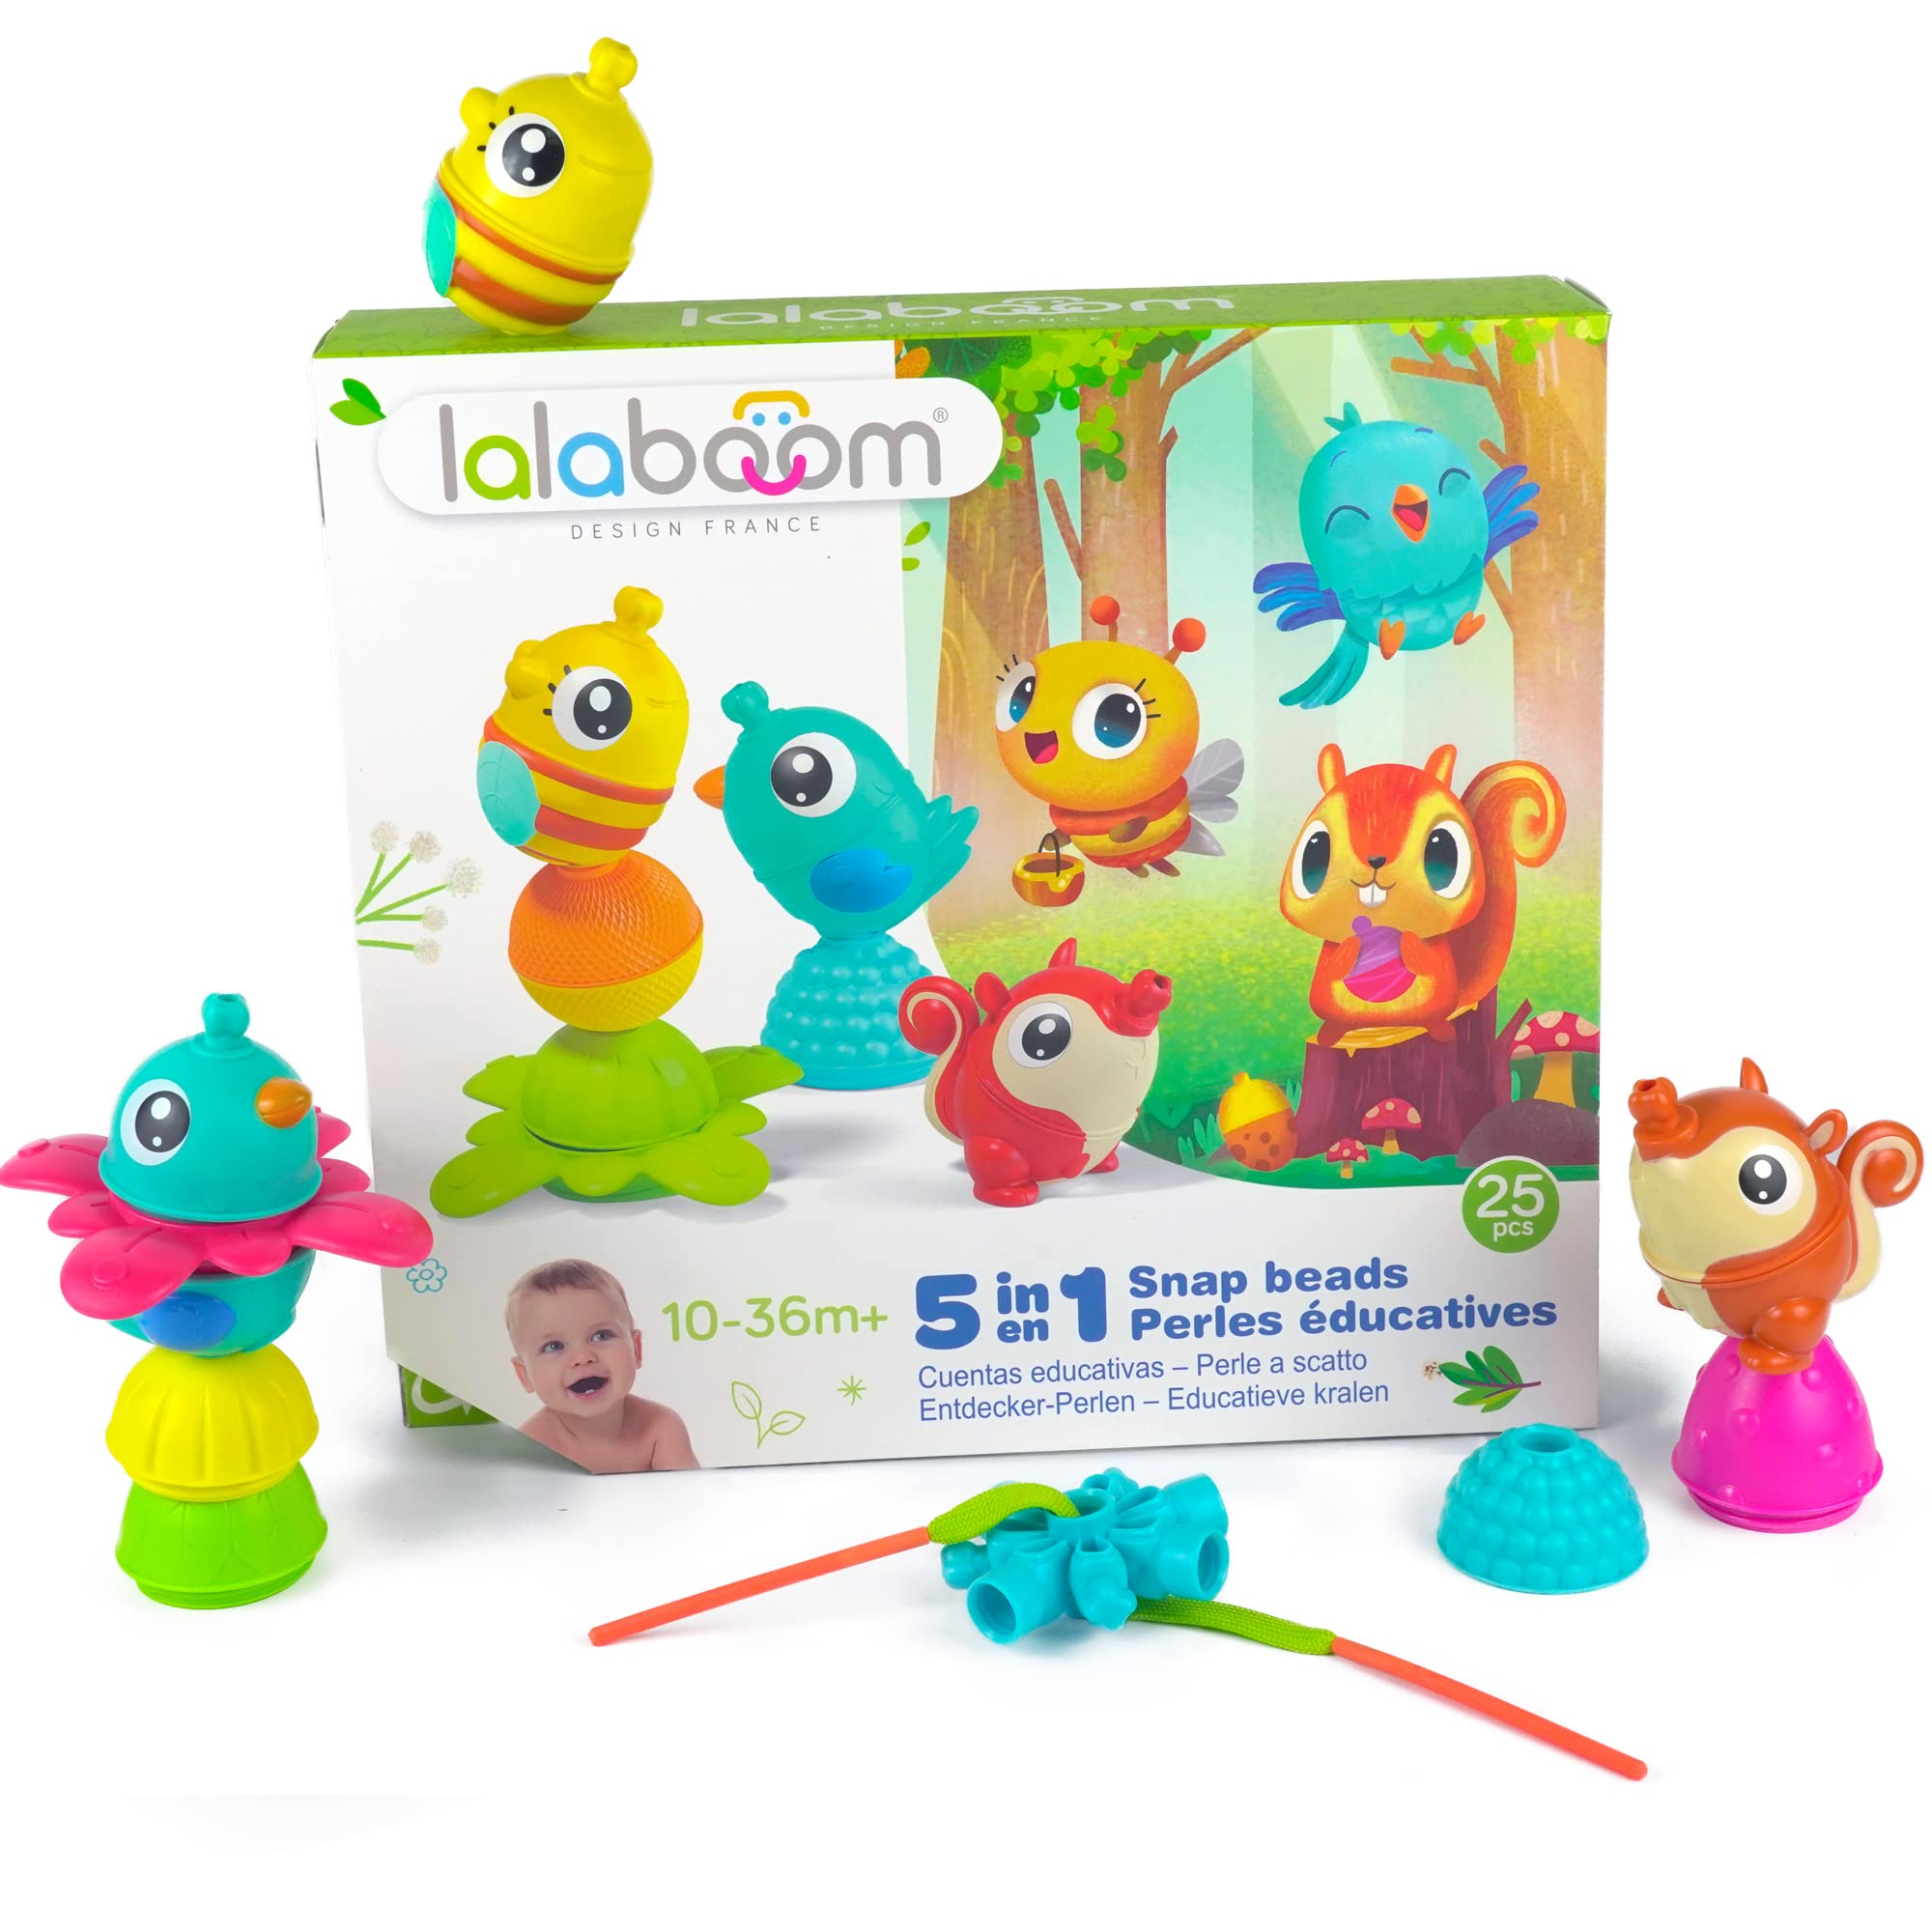 Lalaboom – Chunky Animals & Beads Gift Set - Preschool Educational Beads - Montessori Shapes and Colors Construction Game and Learning Toy - from 10 Months to 4 Years Old - 25 Pieces, BL320